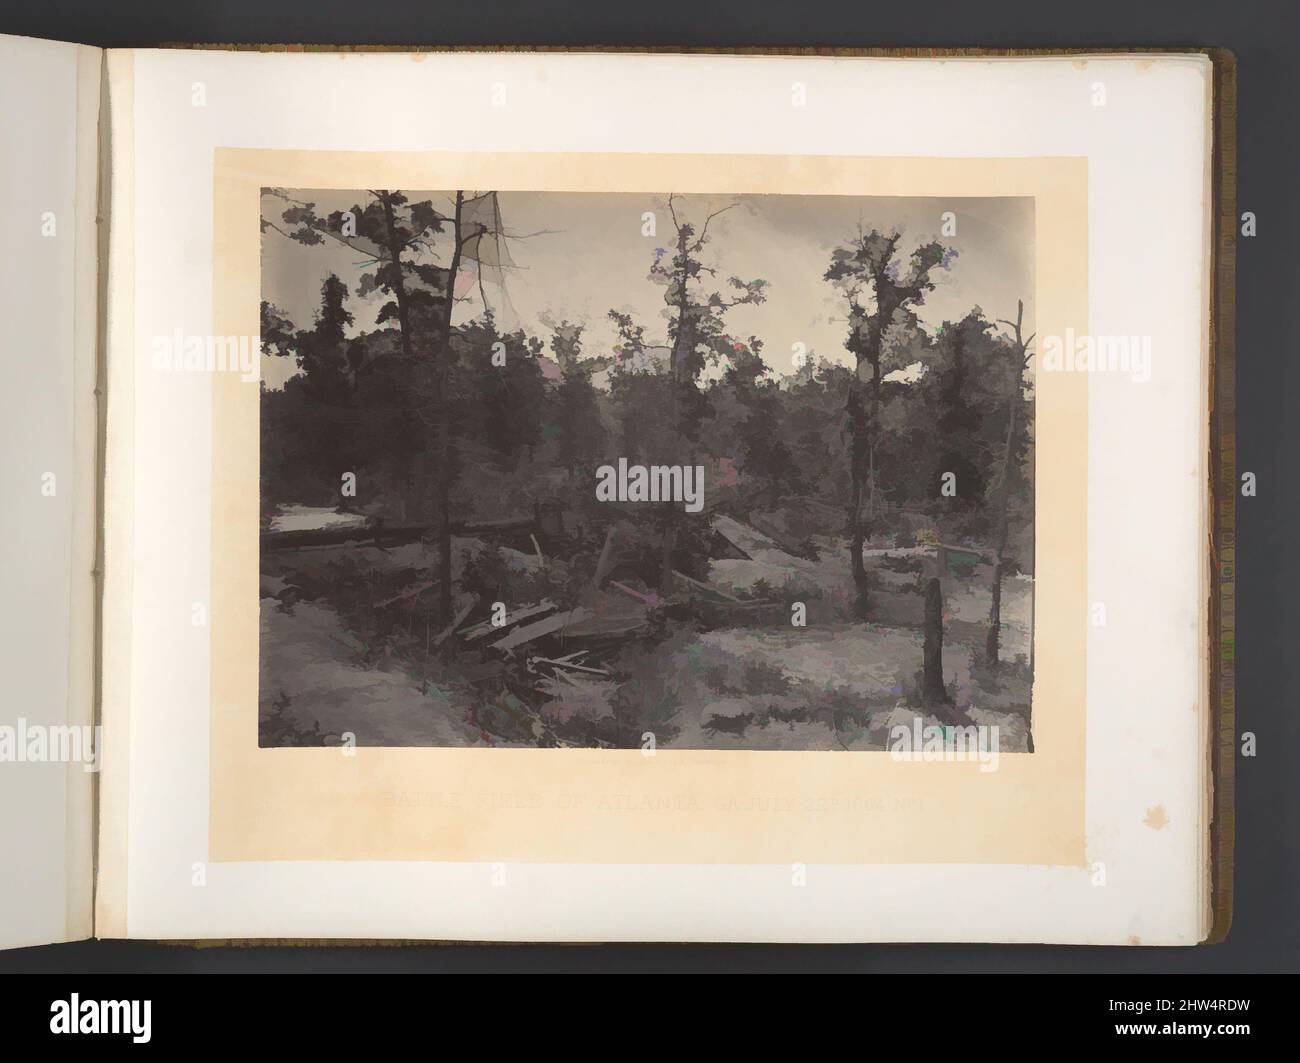 Art inspired by Battle Field of Atlanta, Georgia, July 22nd 1864 No. 1, 1860s, Albumen silver print from glass negative, Photographs, George N. Barnard (American, 1819–1902, Classic works modernized by Artotop with a splash of modernity. Shapes, color and value, eye-catching visual impact on art. Emotions through freedom of artworks in a contemporary way. A timeless message pursuing a wildly creative new direction. Artists turning to the digital medium and creating the Artotop NFT Stock Photo